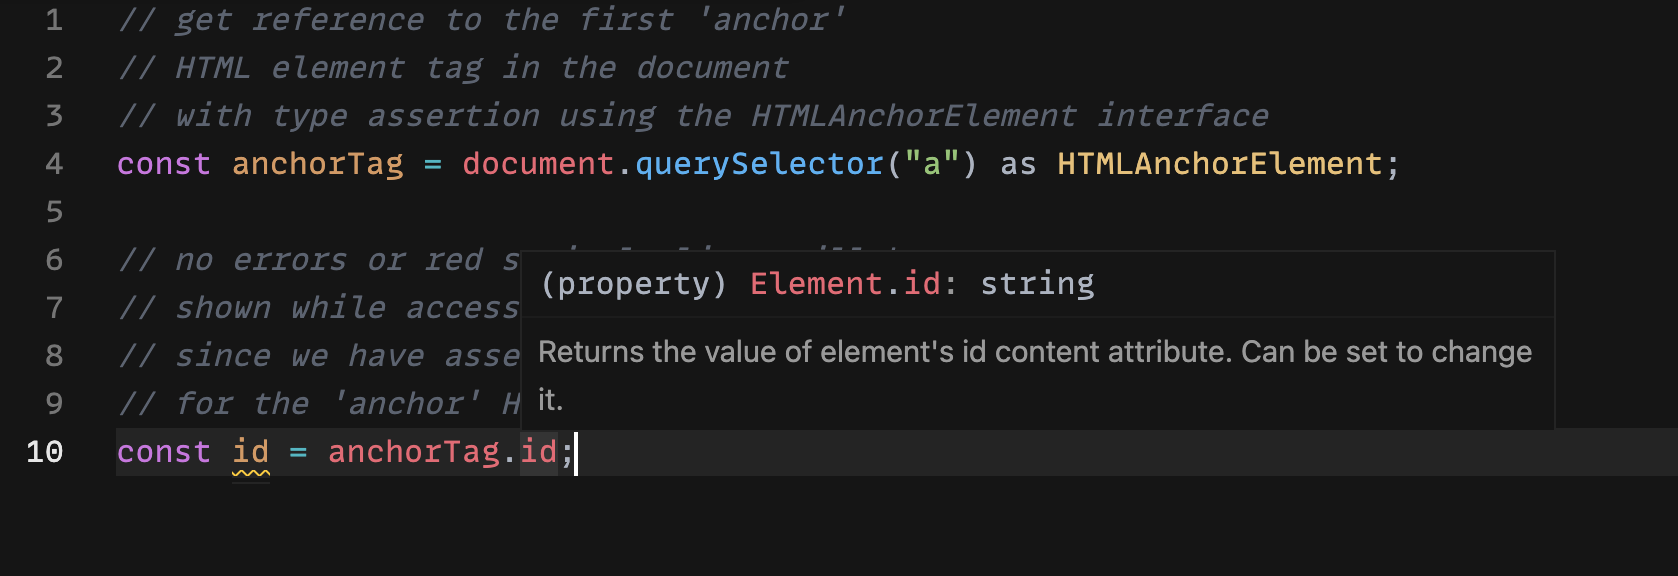 more information about the id property in the anchor HTML element tag